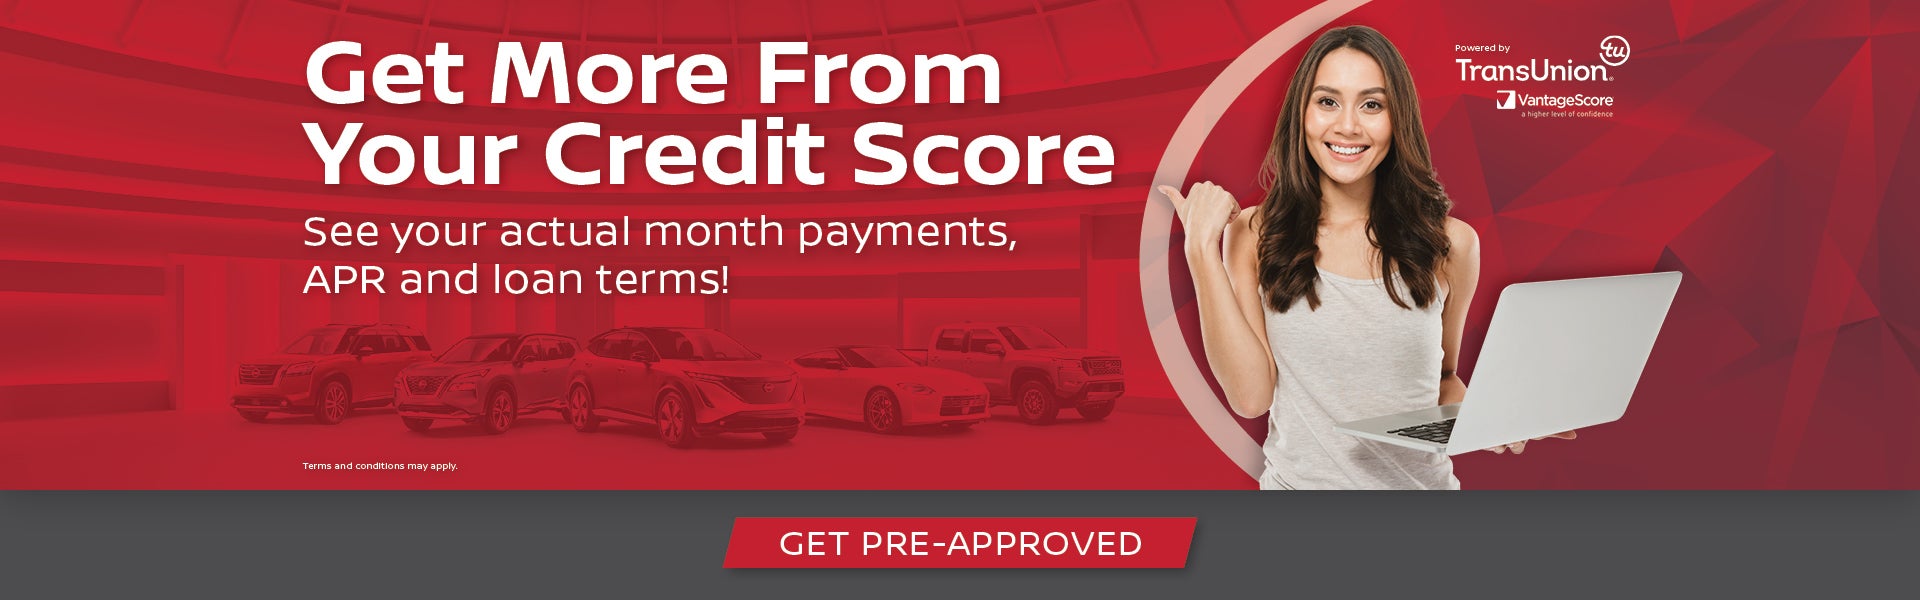 iPreCheck see monthly payments